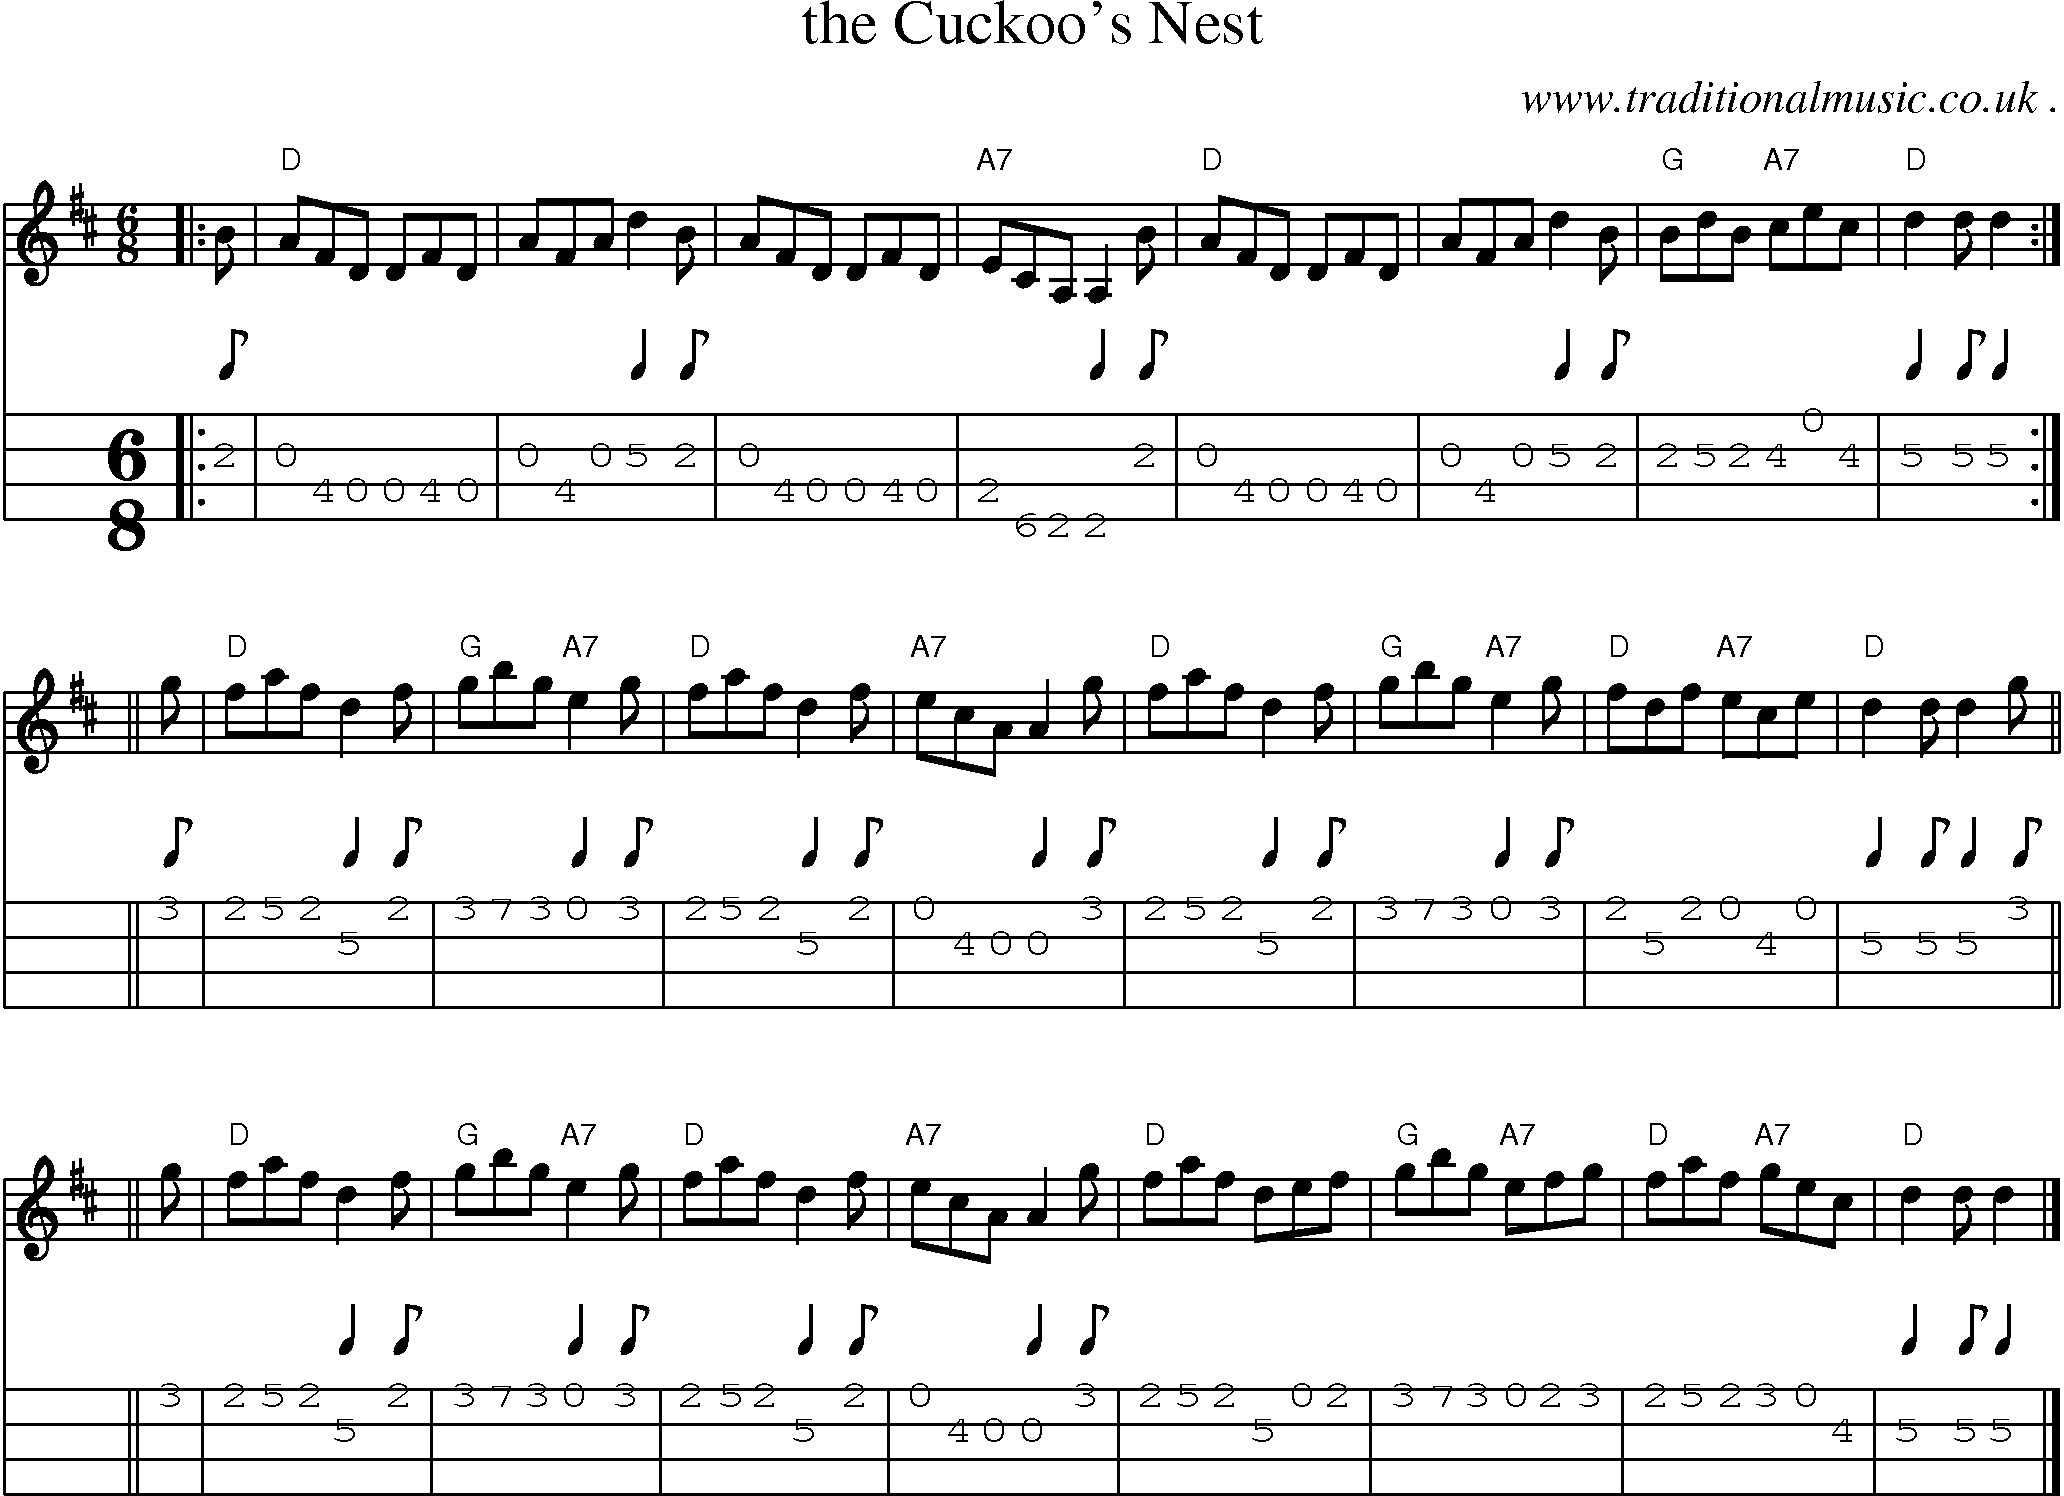 Sheet-music  score, Chords and Mandolin Tabs for The Cuckoos Nest